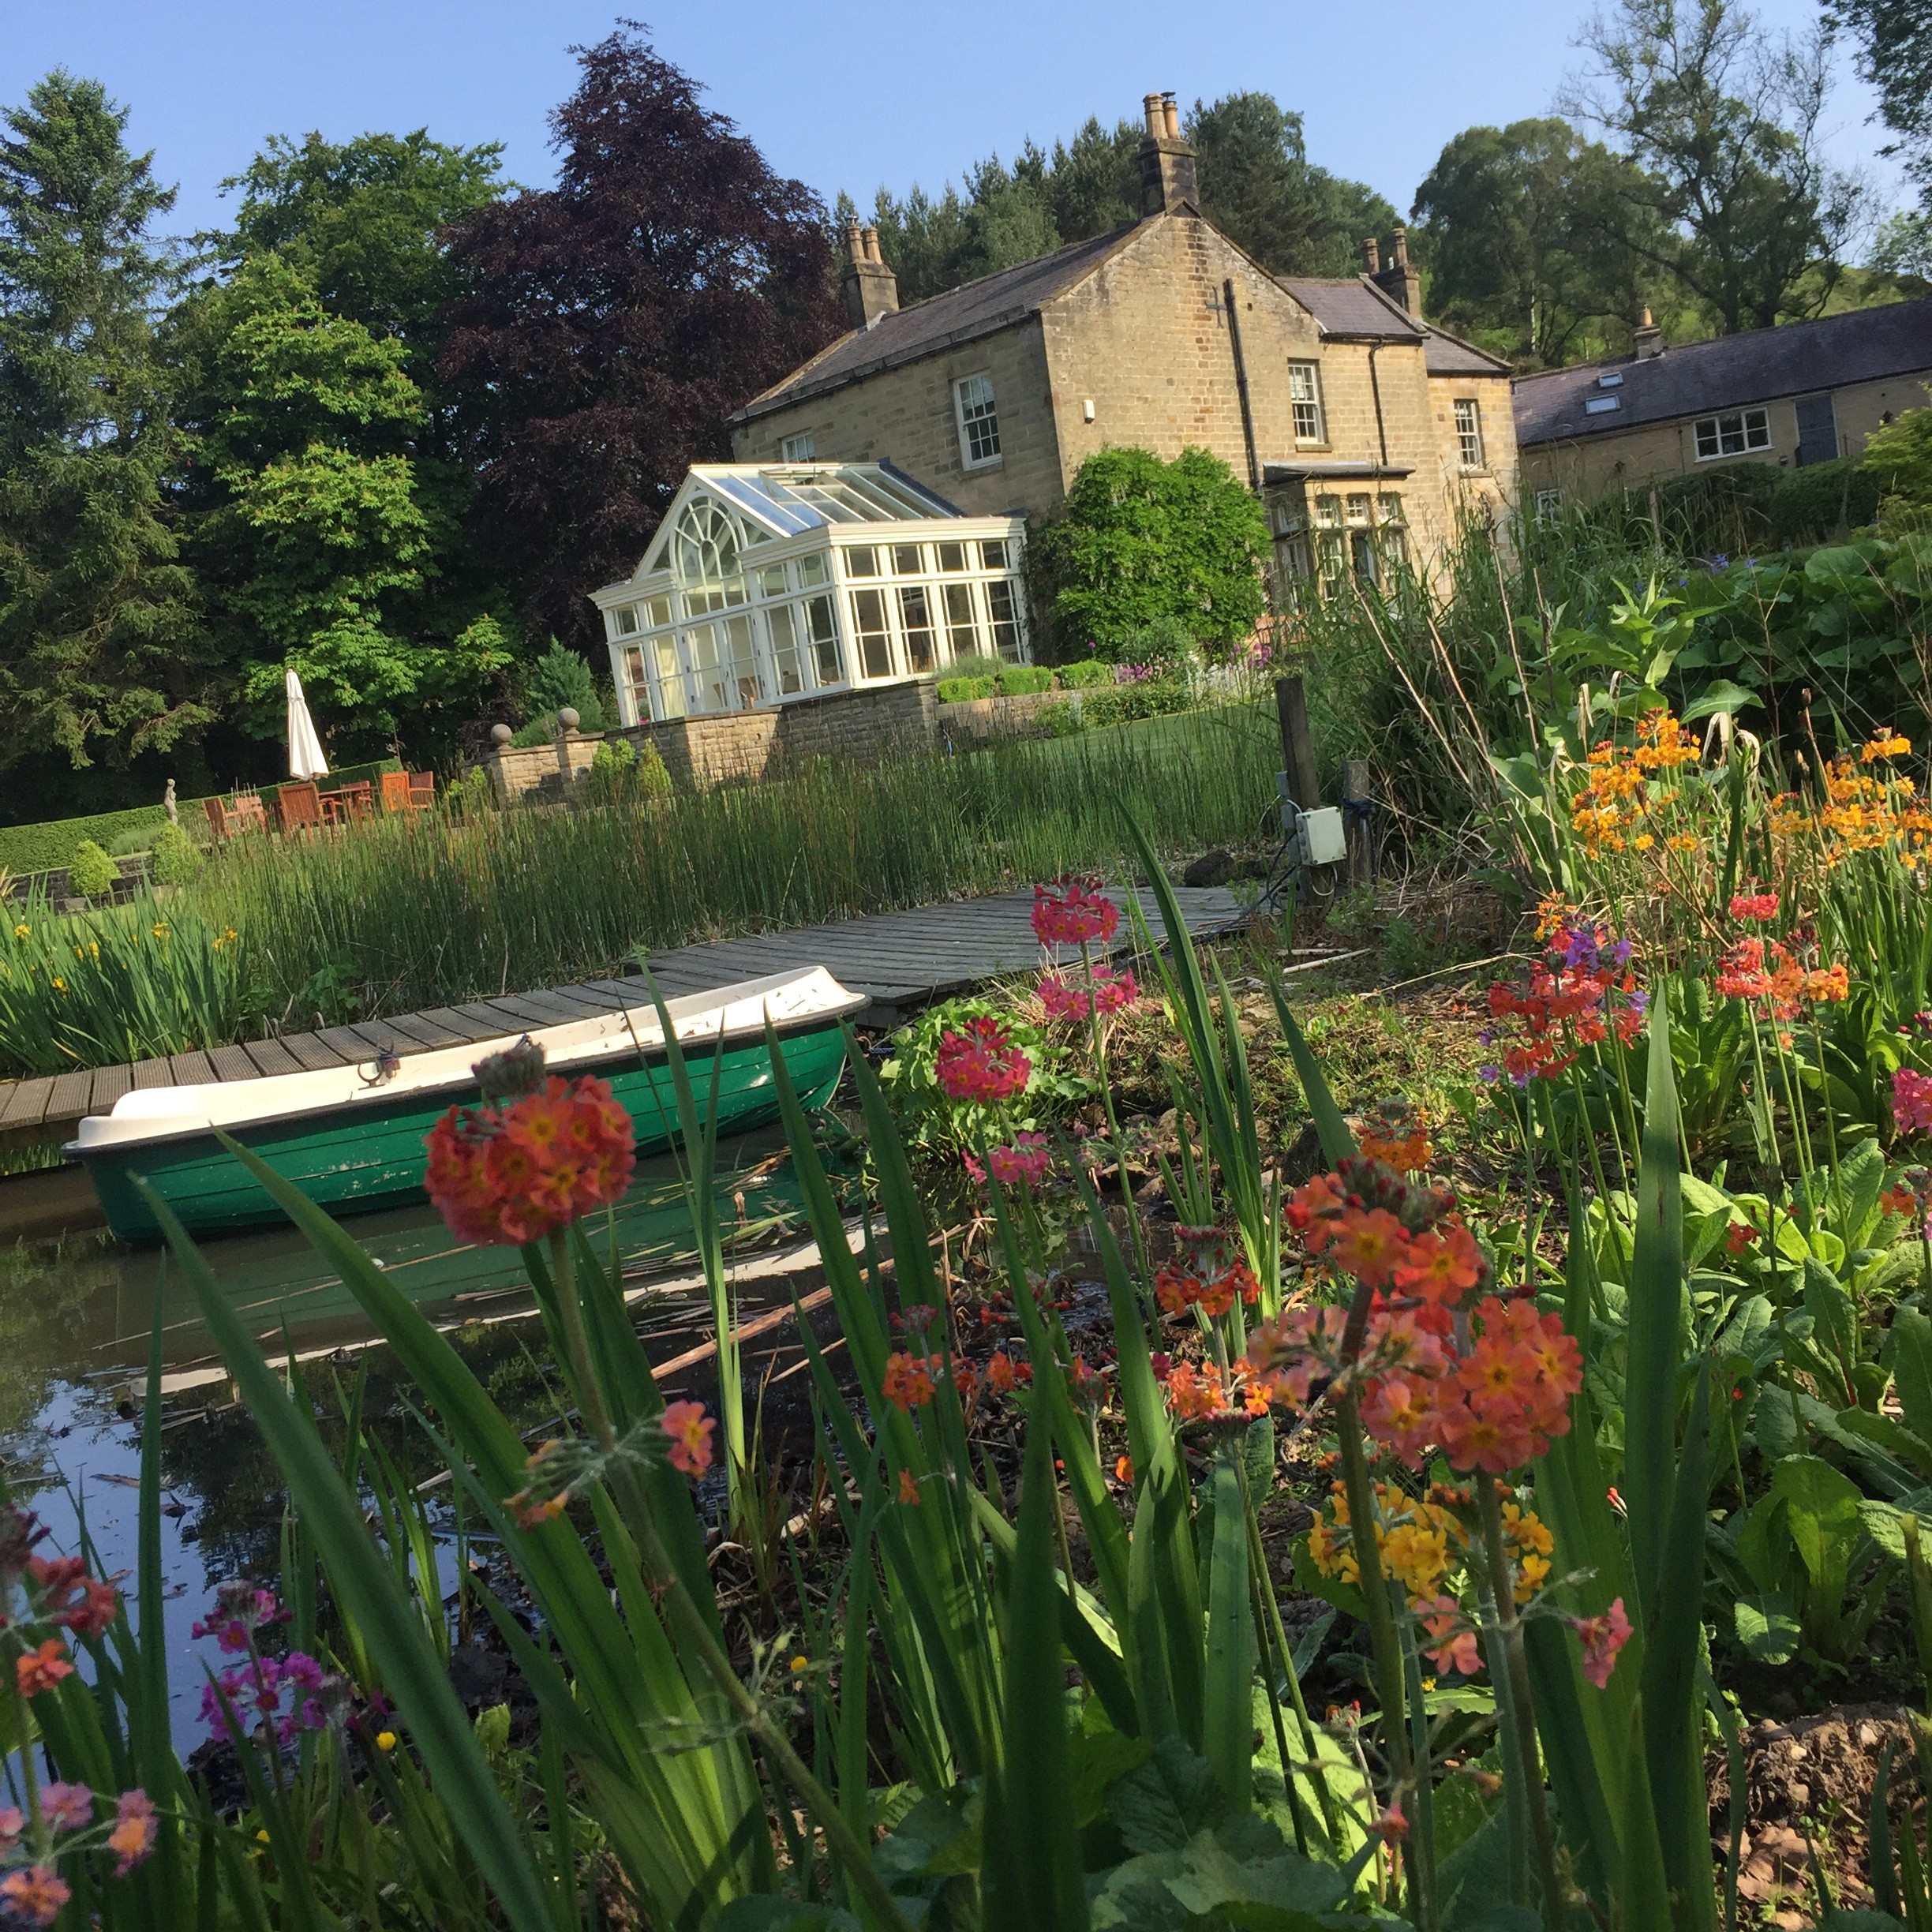 Grove House Levisham Wildlife pond and boat in June 